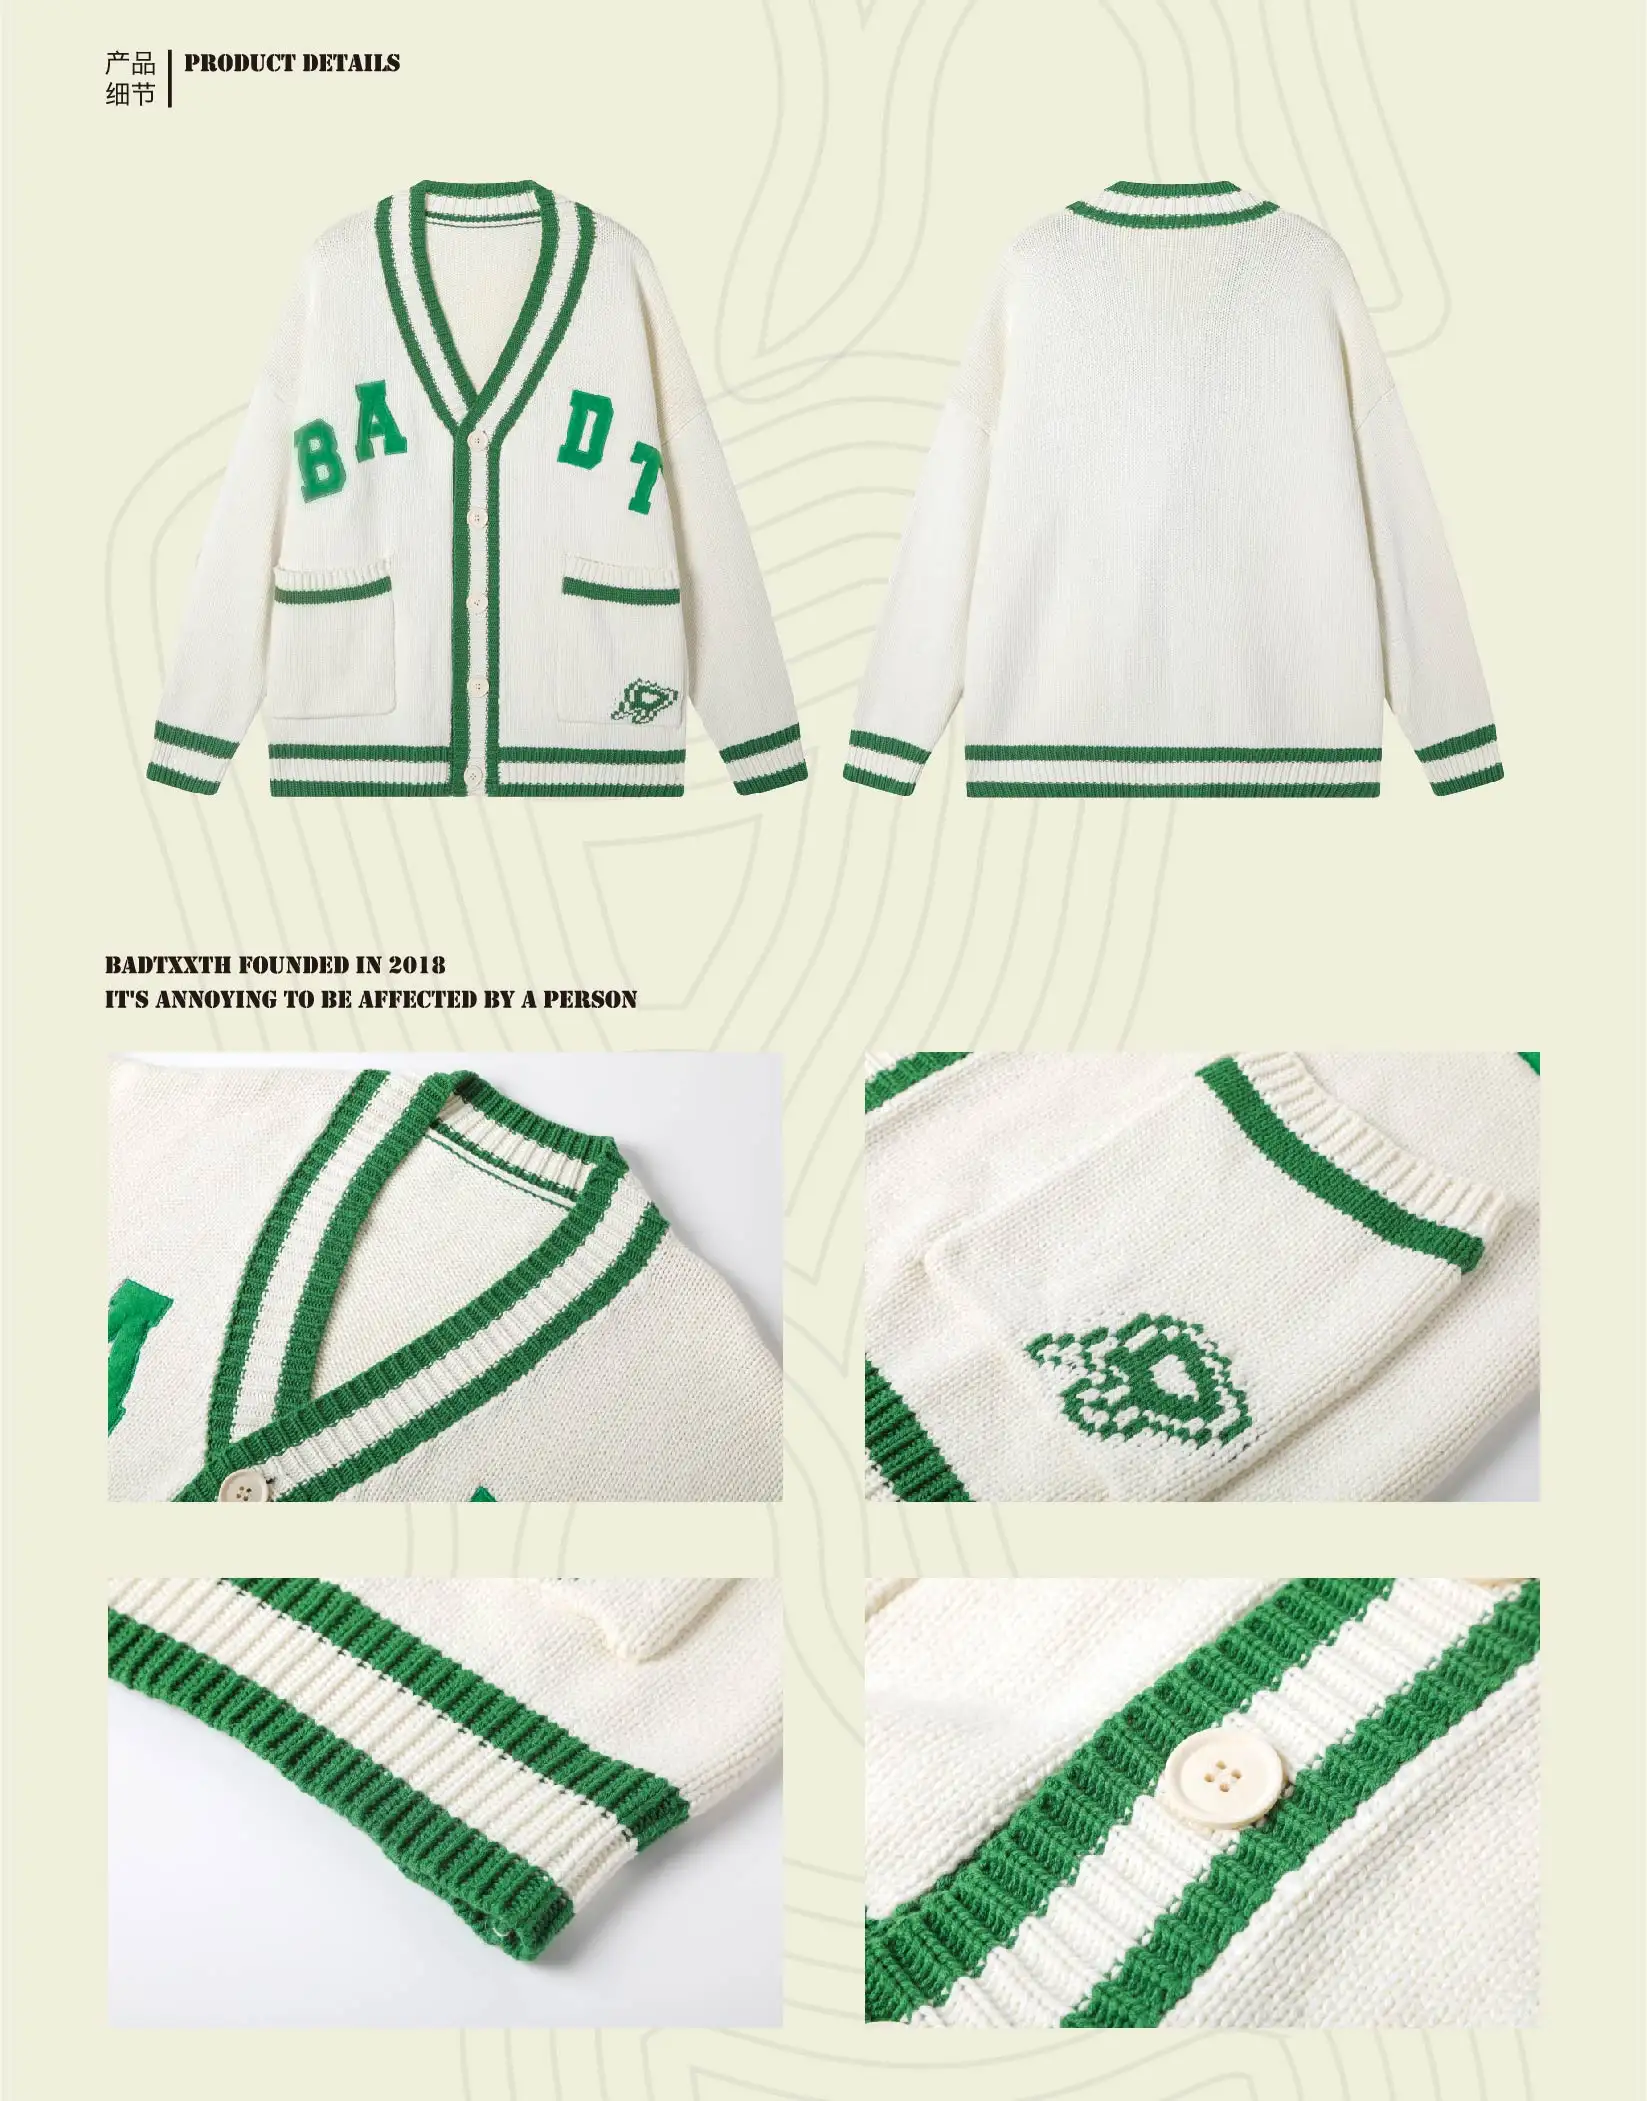 2023 Autumn Winter Provide Custom Logo Men's Shrug Long Sleeve Casual Pink And Green Sorority Letter Style Knit Sweater Cardigan